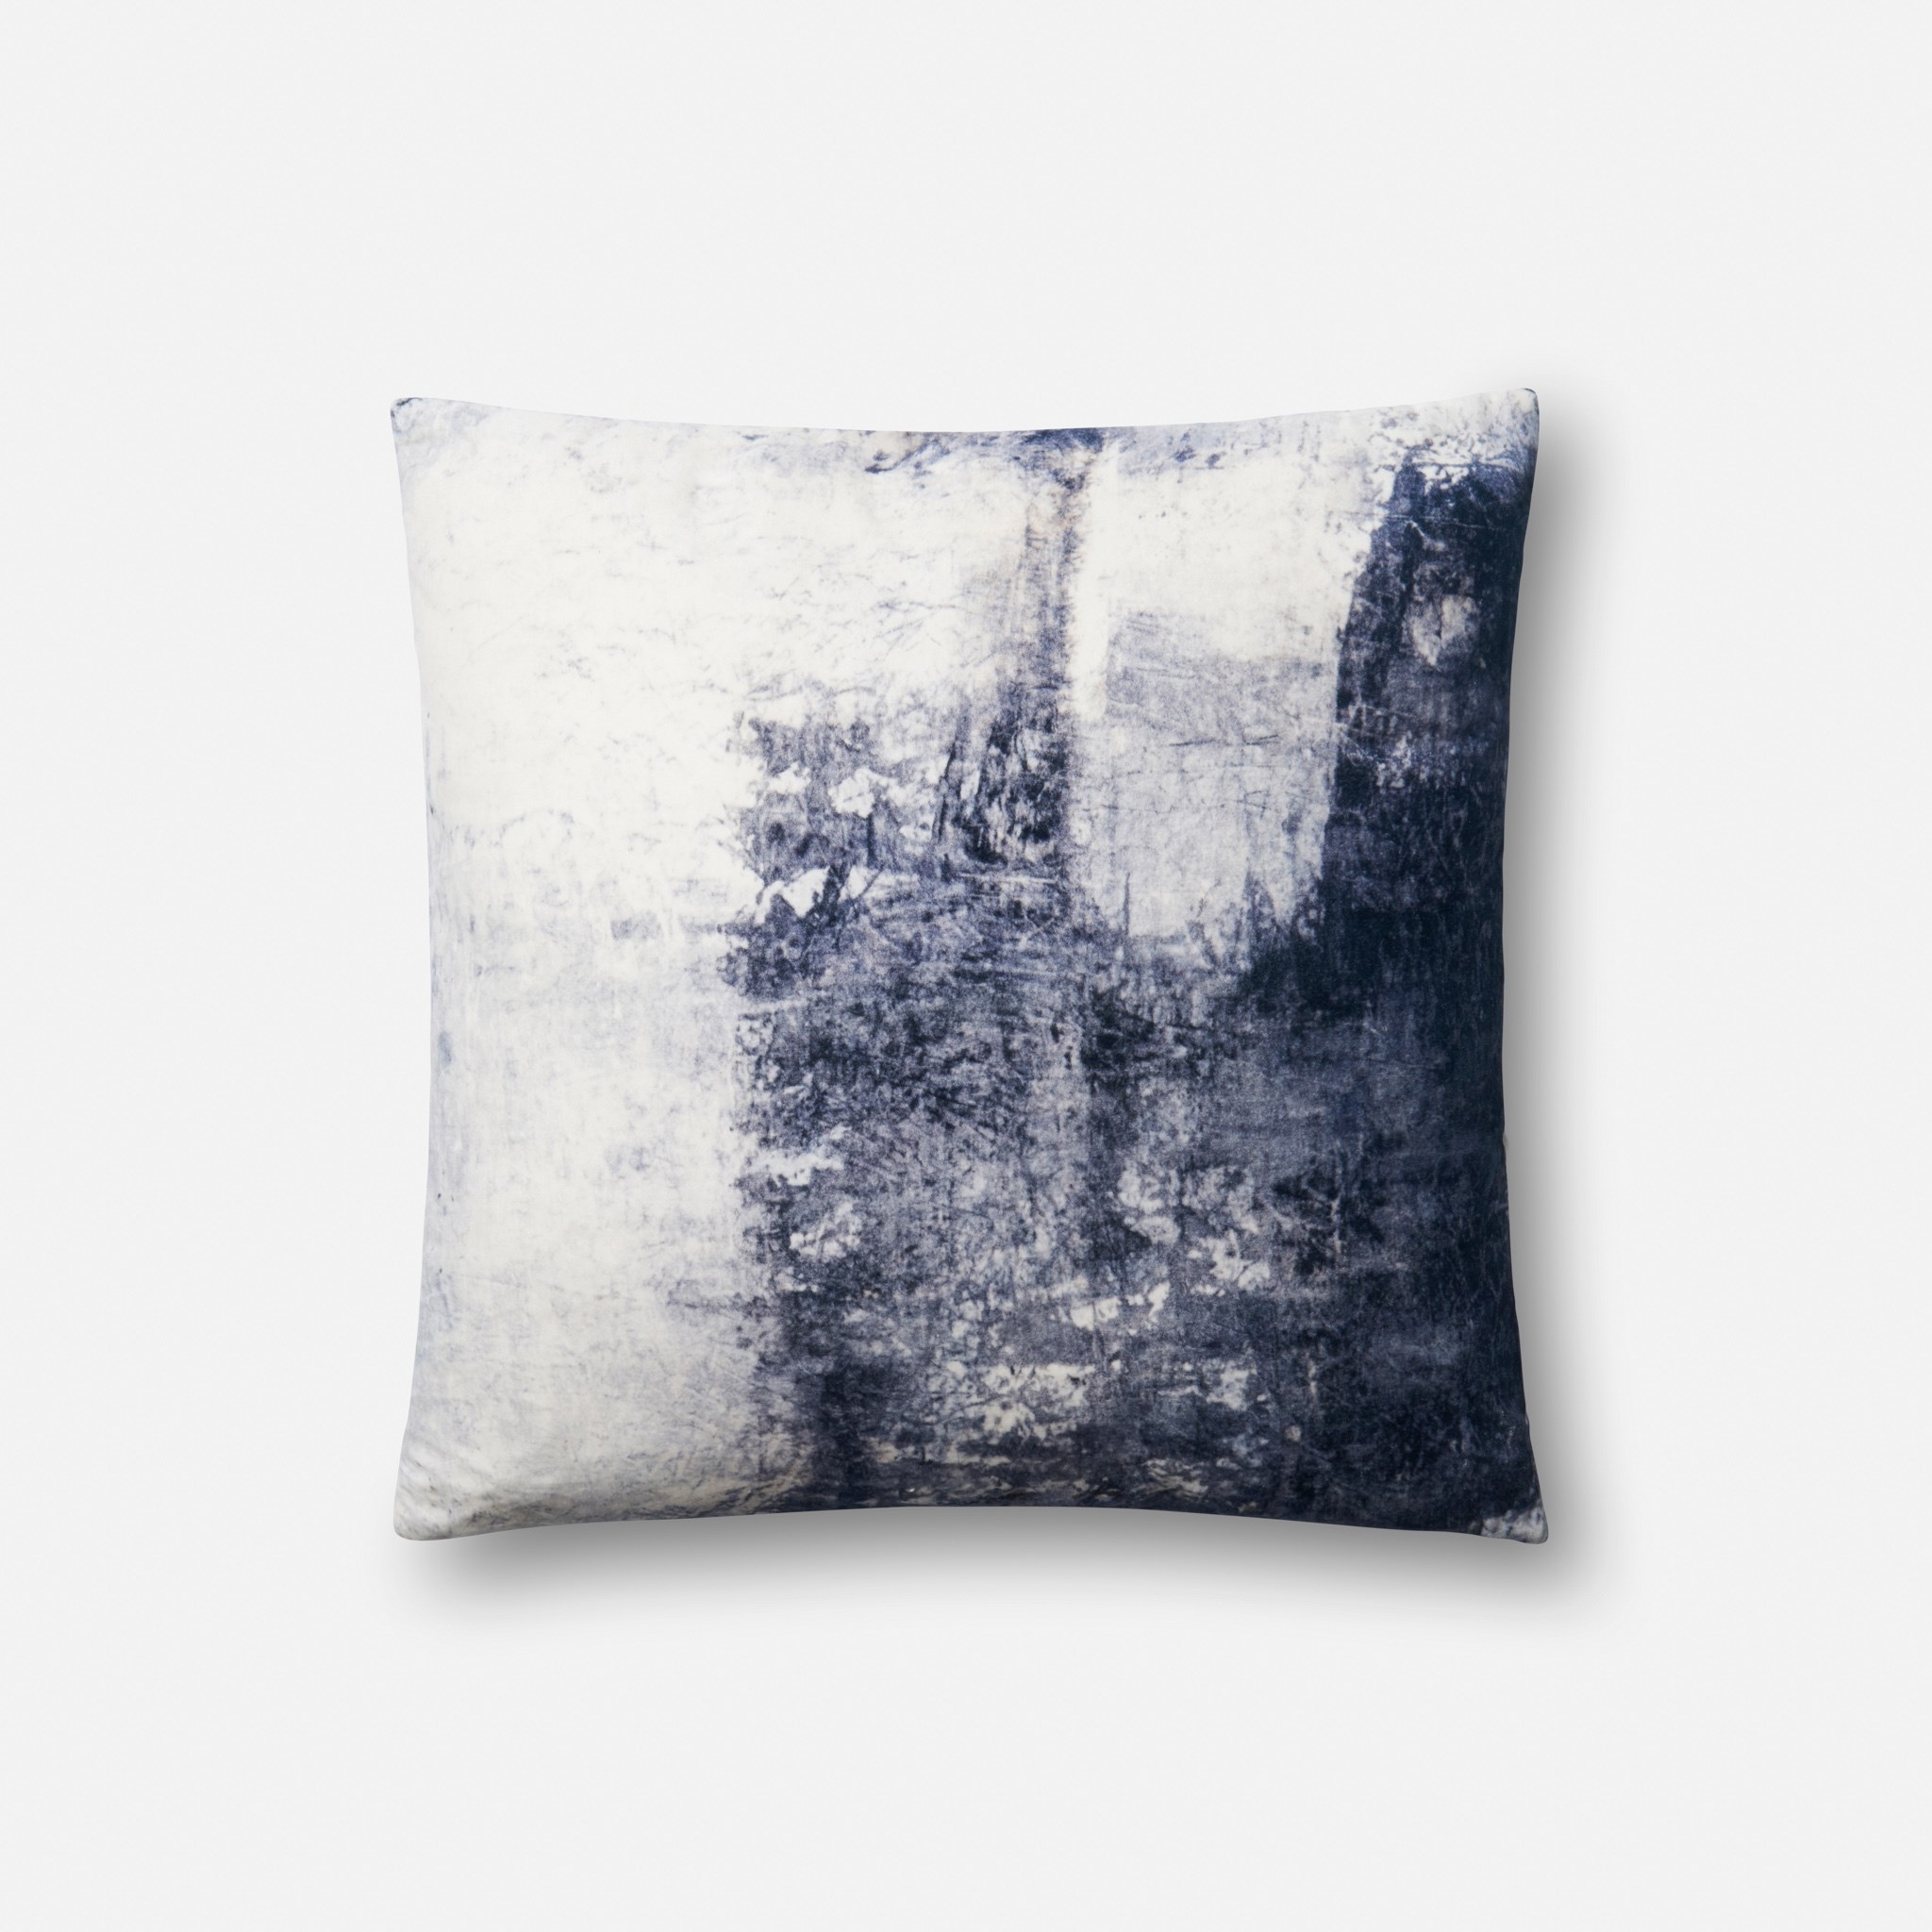 PILLOWS - BLUE - 18" X 18" Cover Only - Image 0